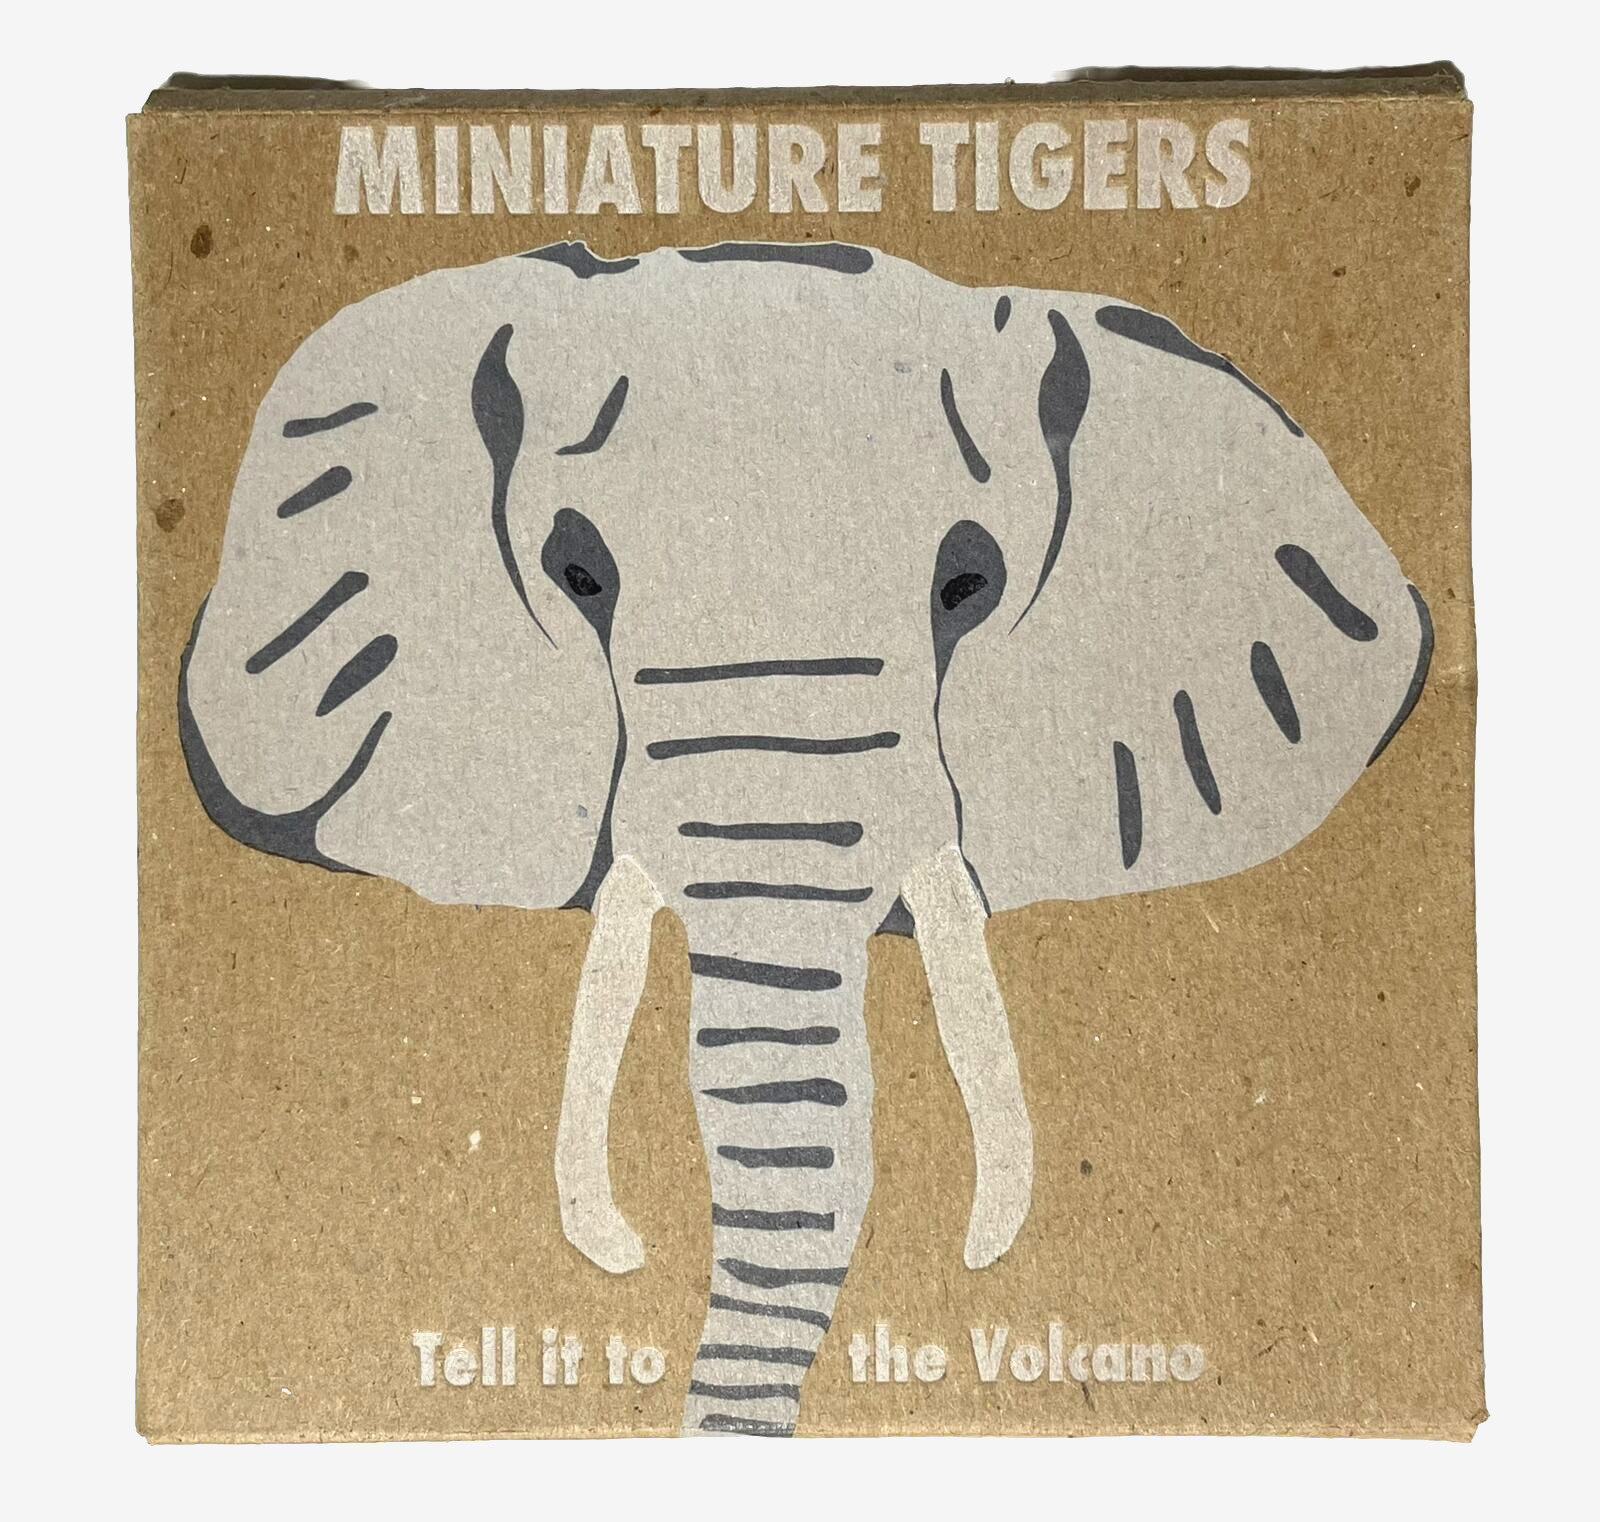 Miniature Tigers - Tell It To The Volcano Limited Edition Numbered CD #812/1000